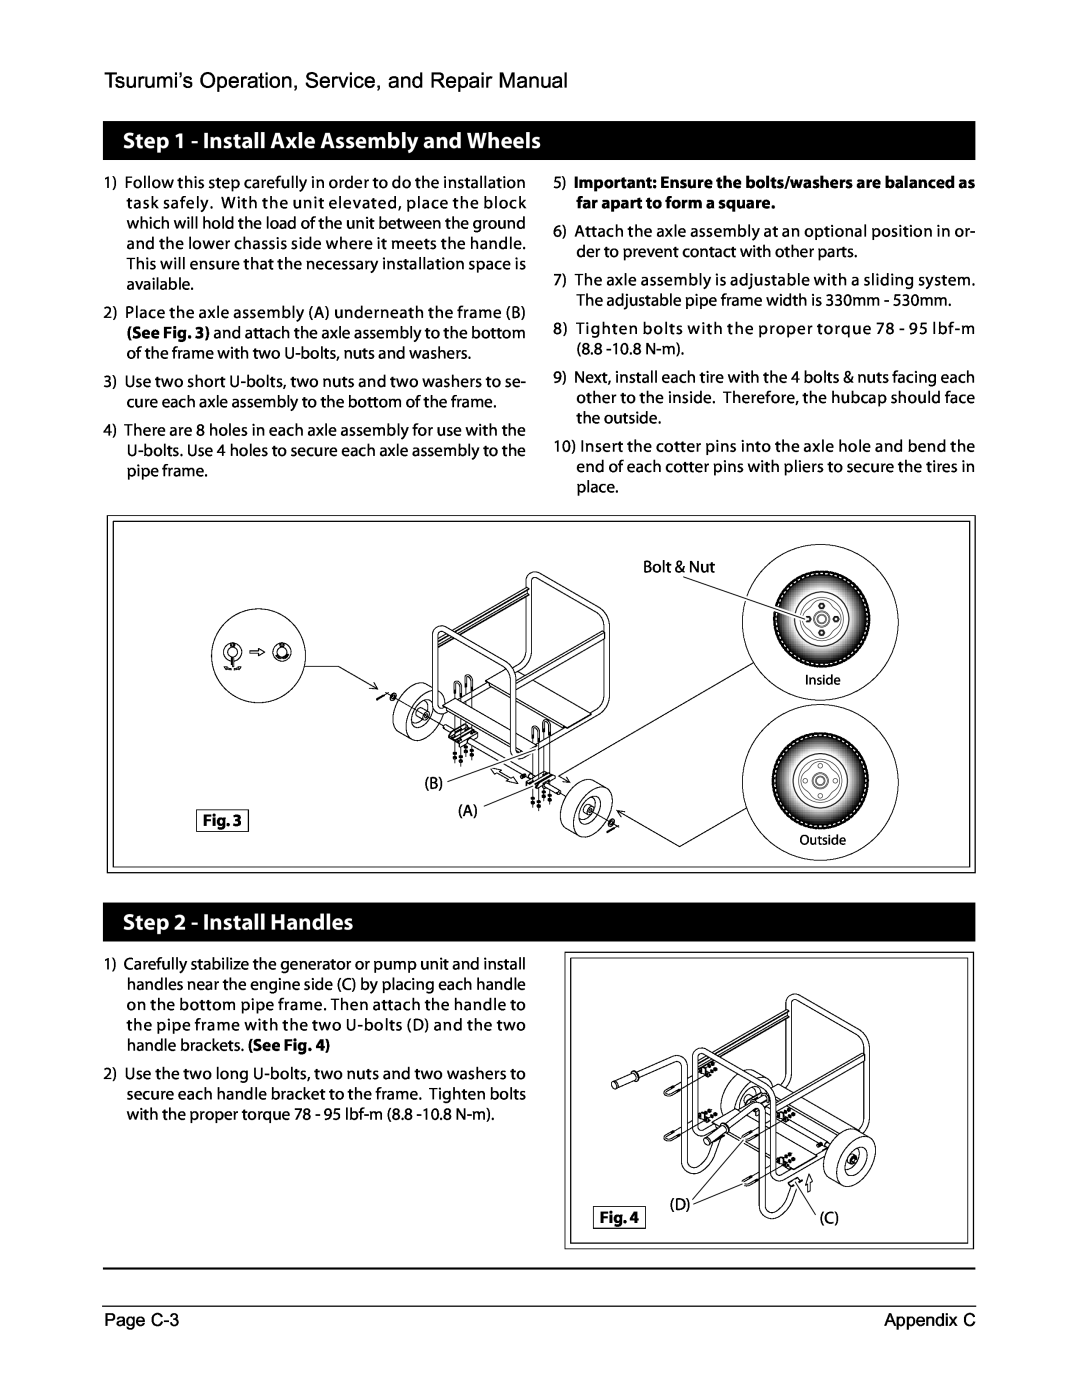 Honda Power Equipment TPG-2900H-DX, TPG-7000H-DXE, TPG-6000H-DX manual Install Axle Assembly and Wheels, Install Handles, Fig 